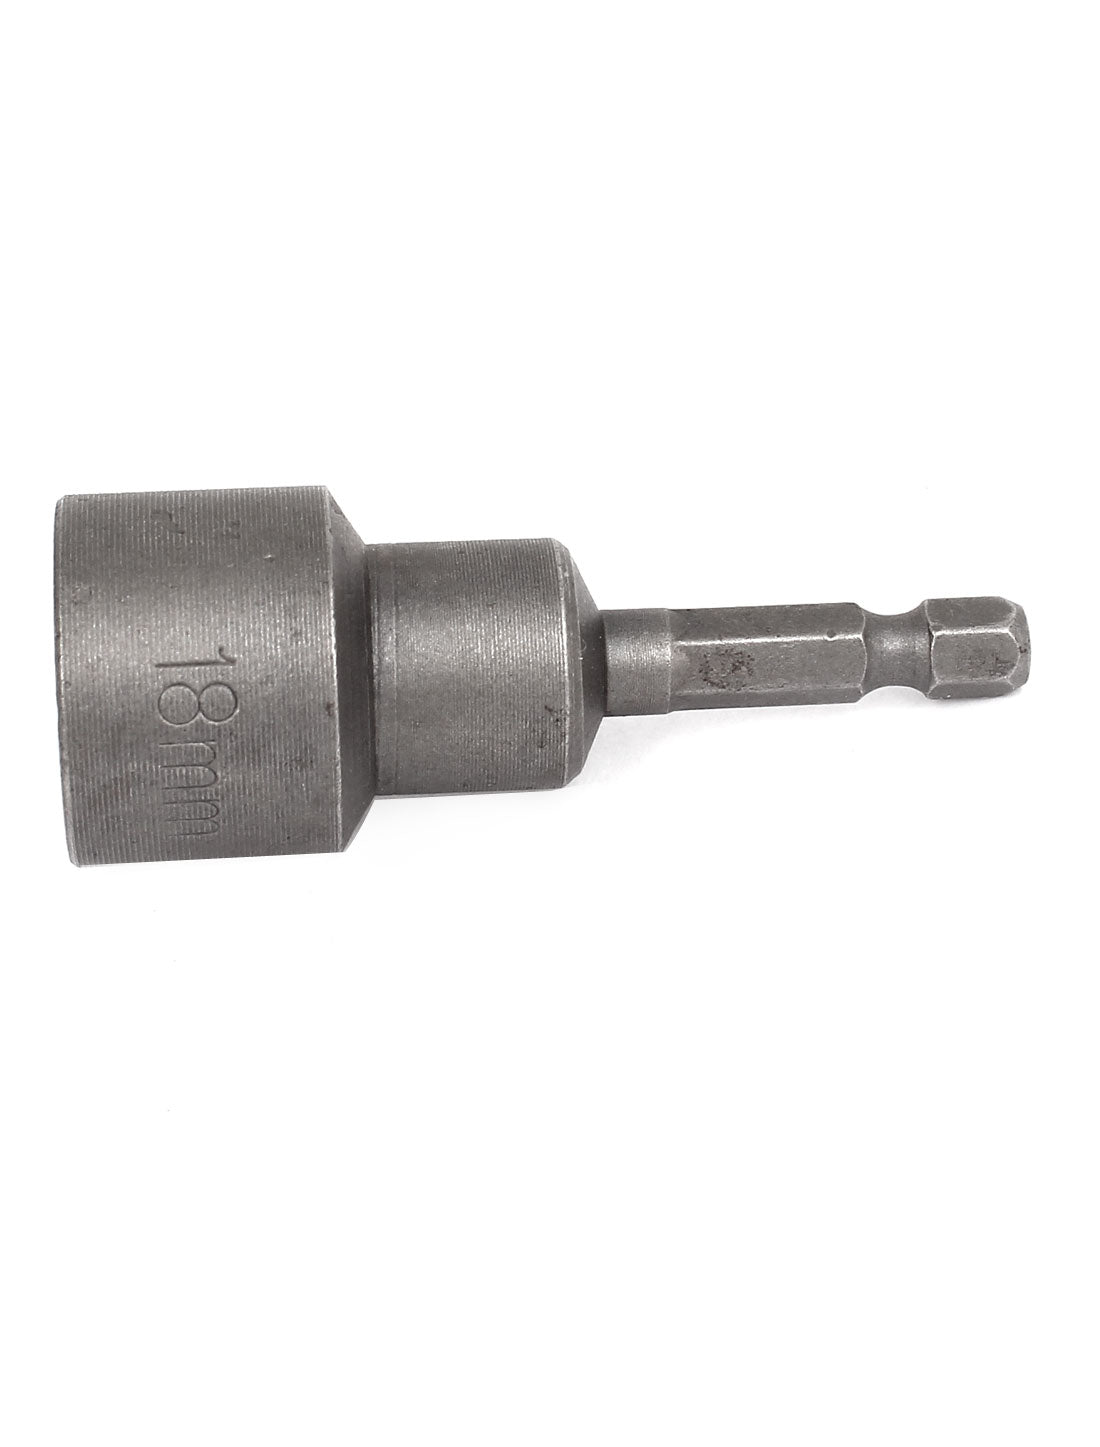 uxcell Uxcell 1/4" Shank 18mm Hex Socket Magnetic Nut Driver Bit Adapter Gray